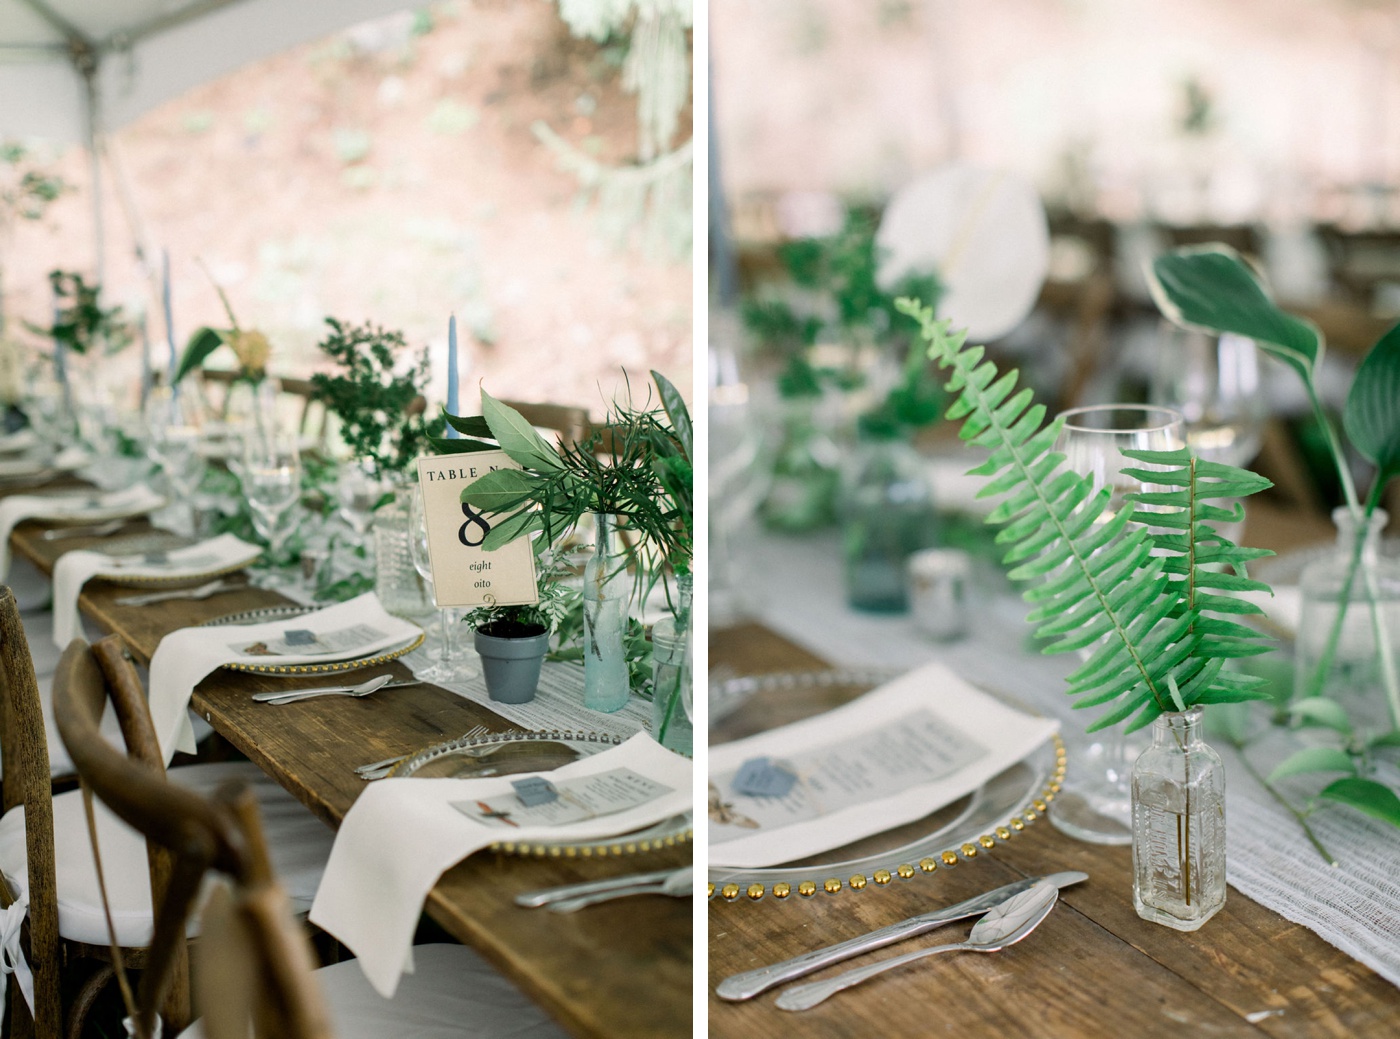 White gauze table runners, blue taper candles, and greenery for a tropical-inspired wedding reception